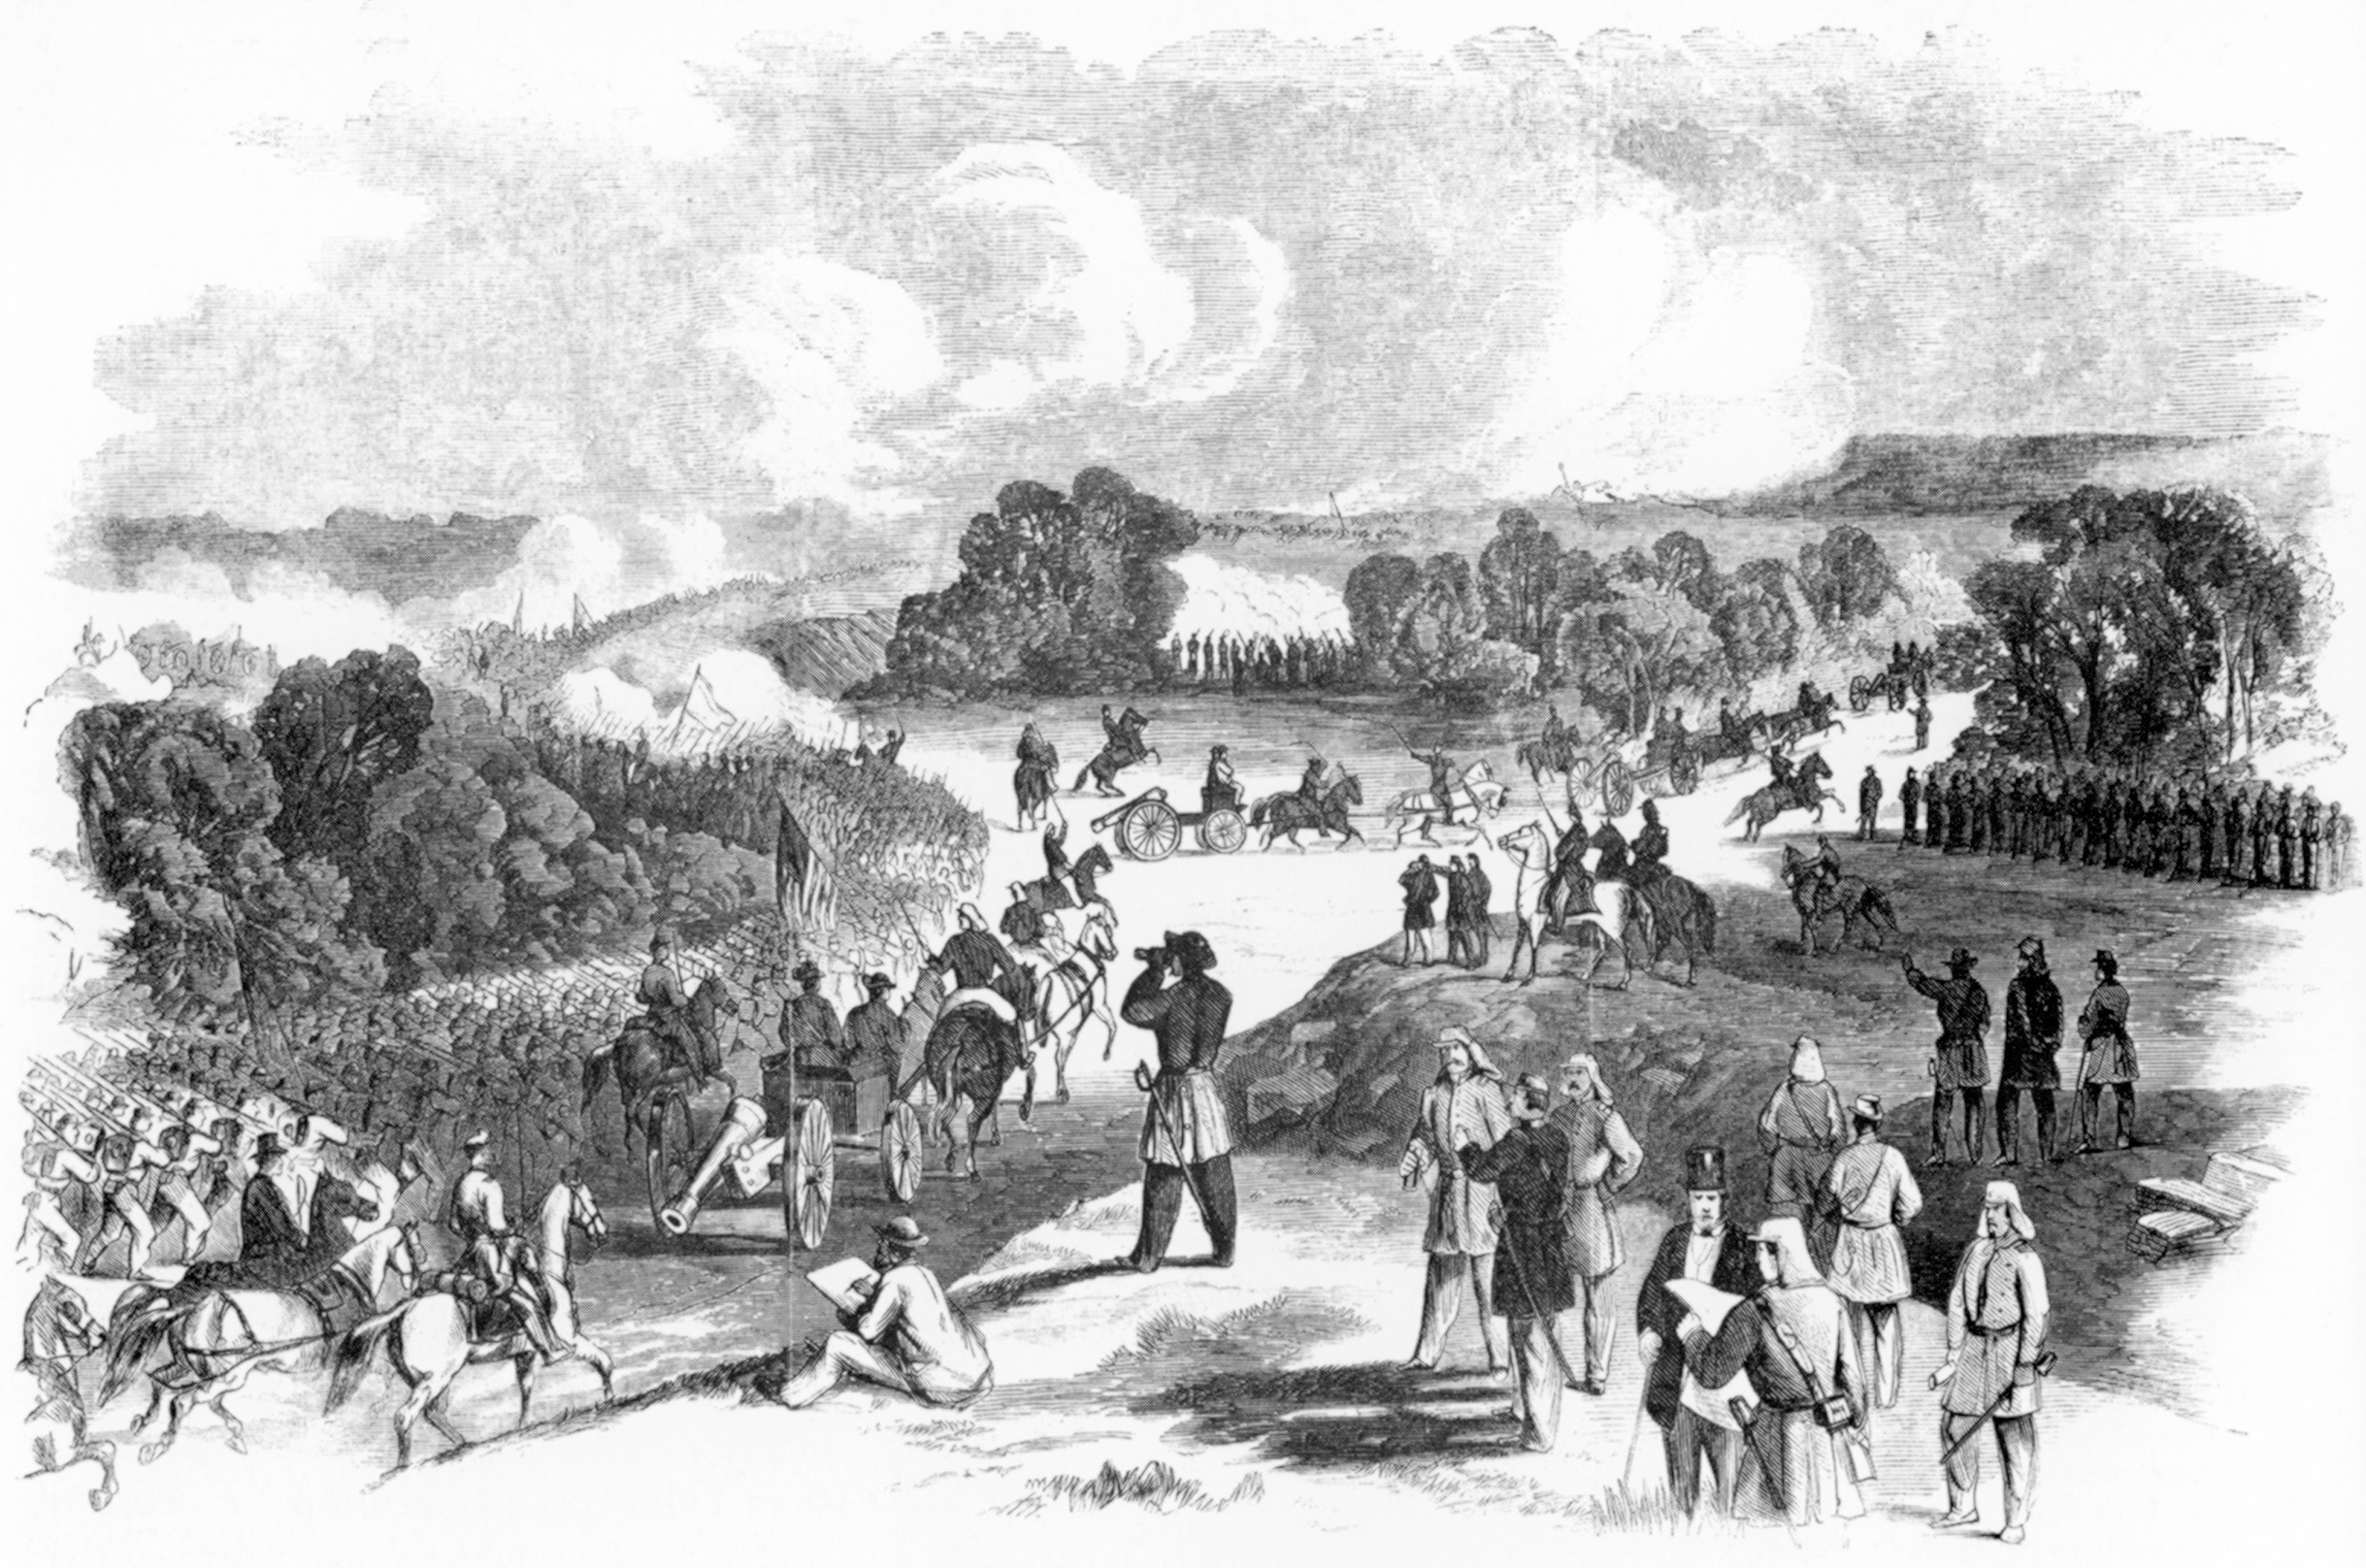 A column of Federal soldiers march to battle in the morning.